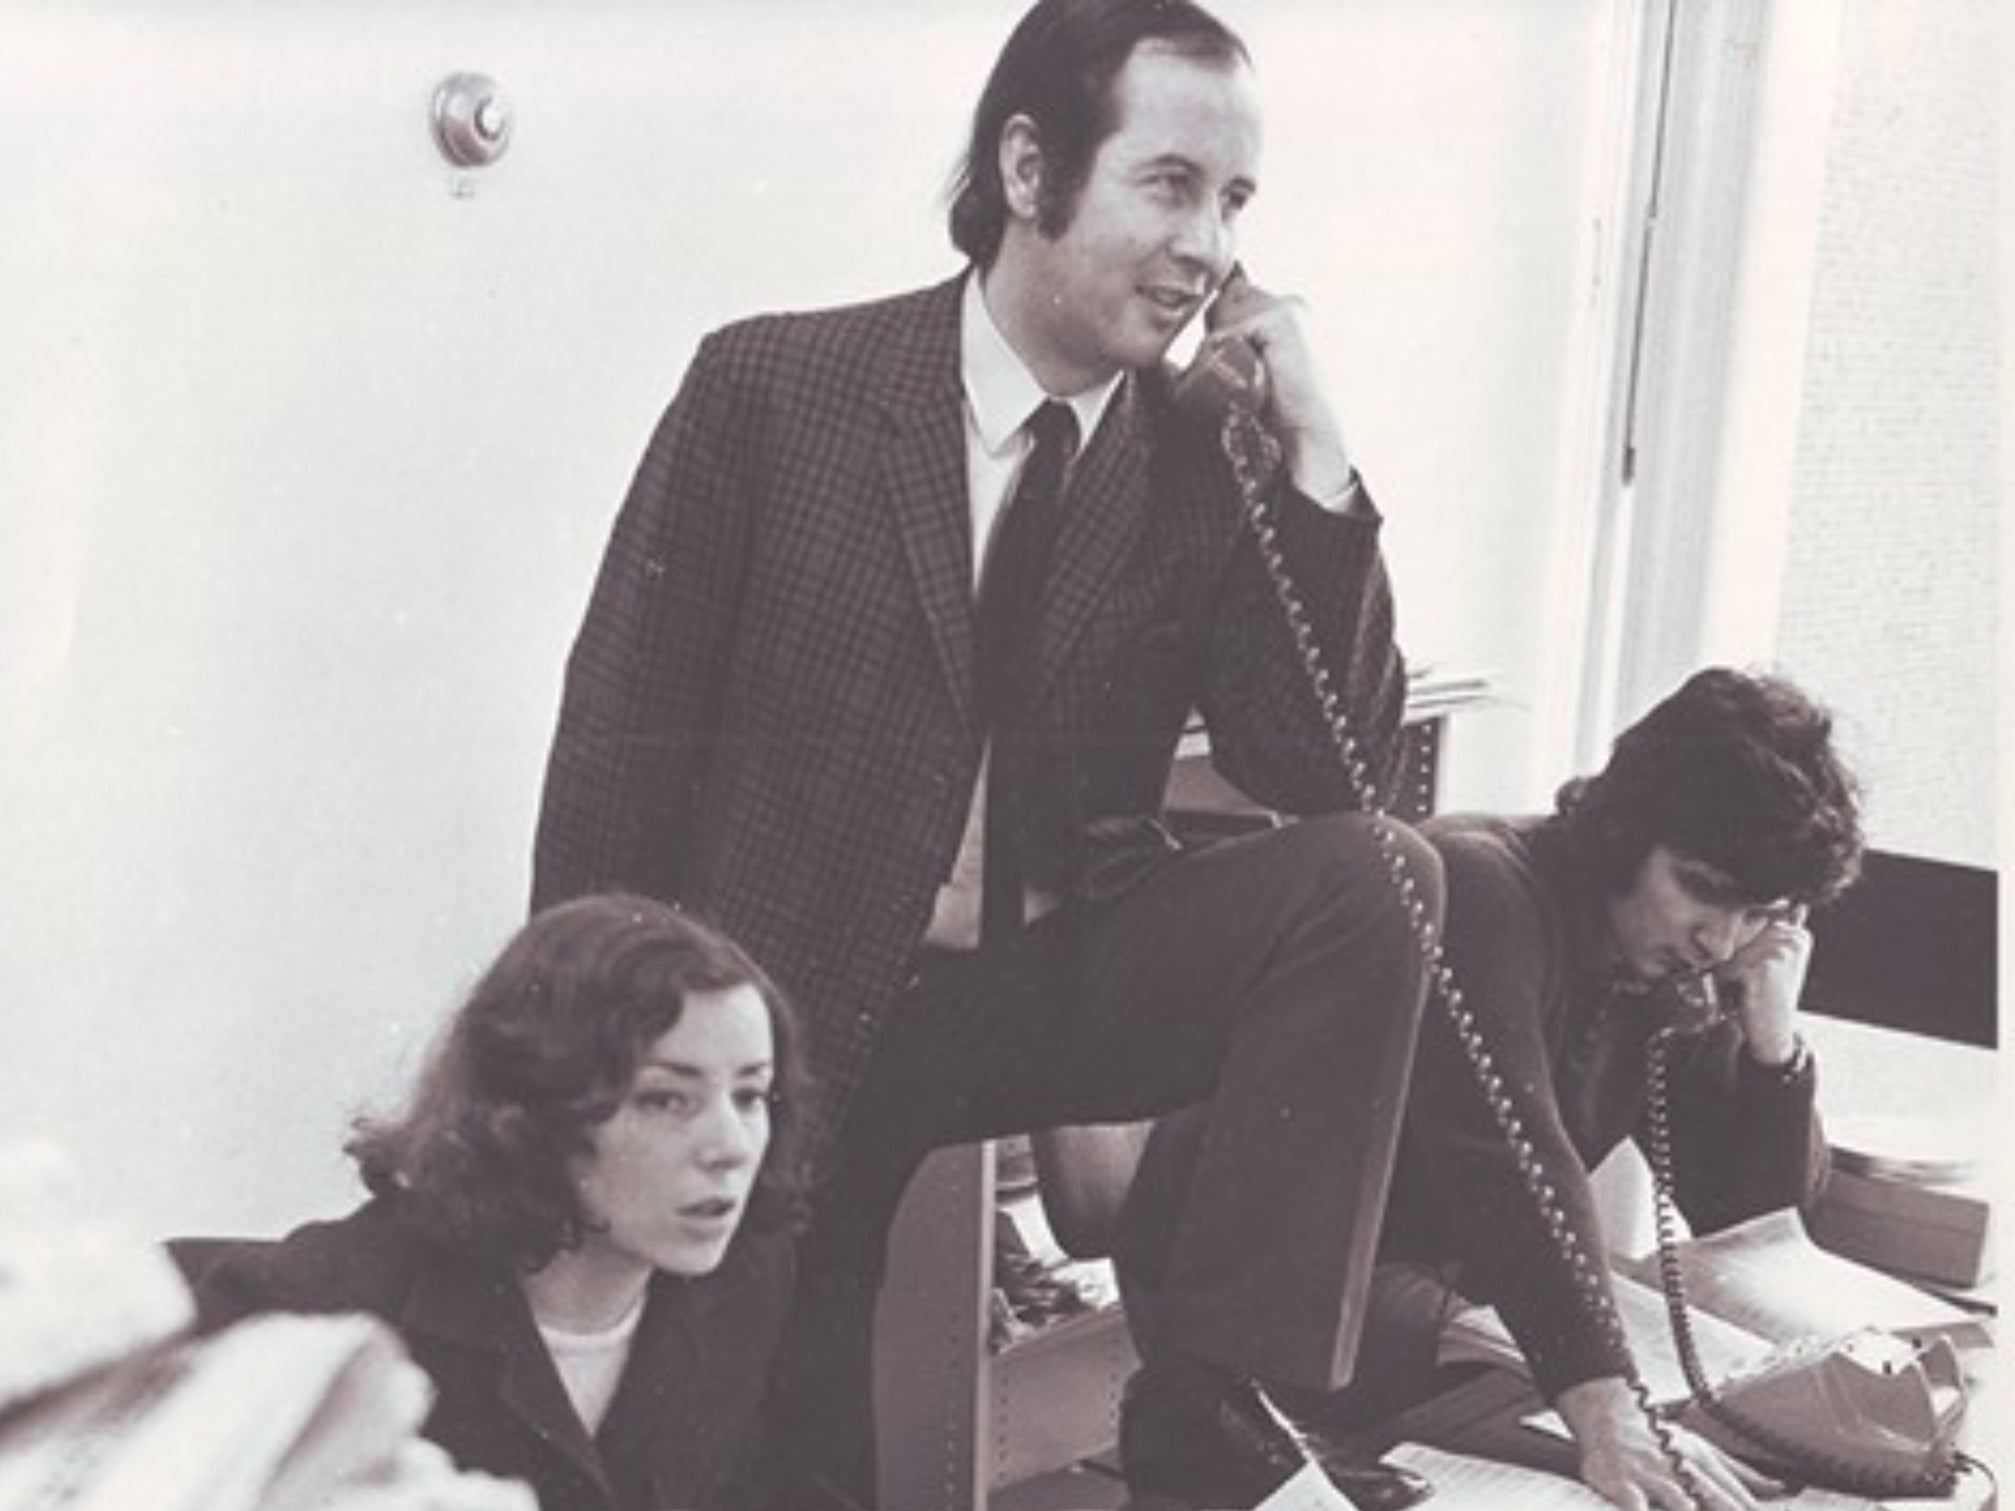 During a long career, Dobson (centre) worked in regional newsrooms across the country